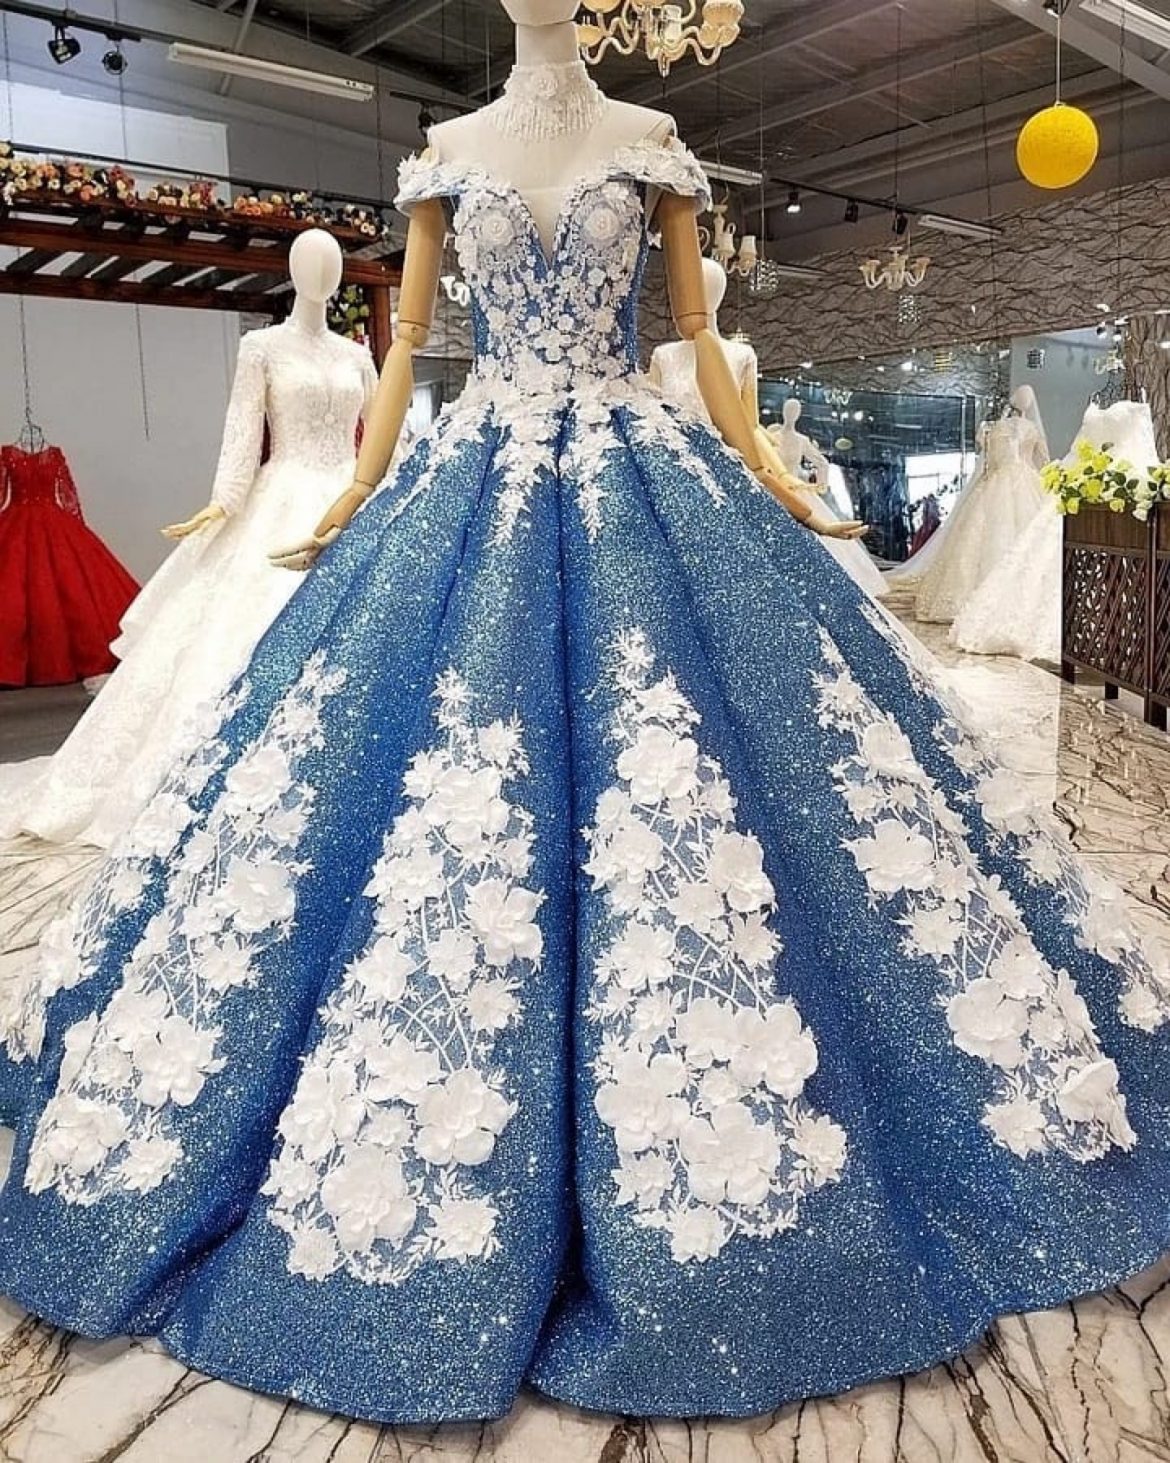 15 Best Blue and White Wedding Dresses in 2023 - Royal Wedding